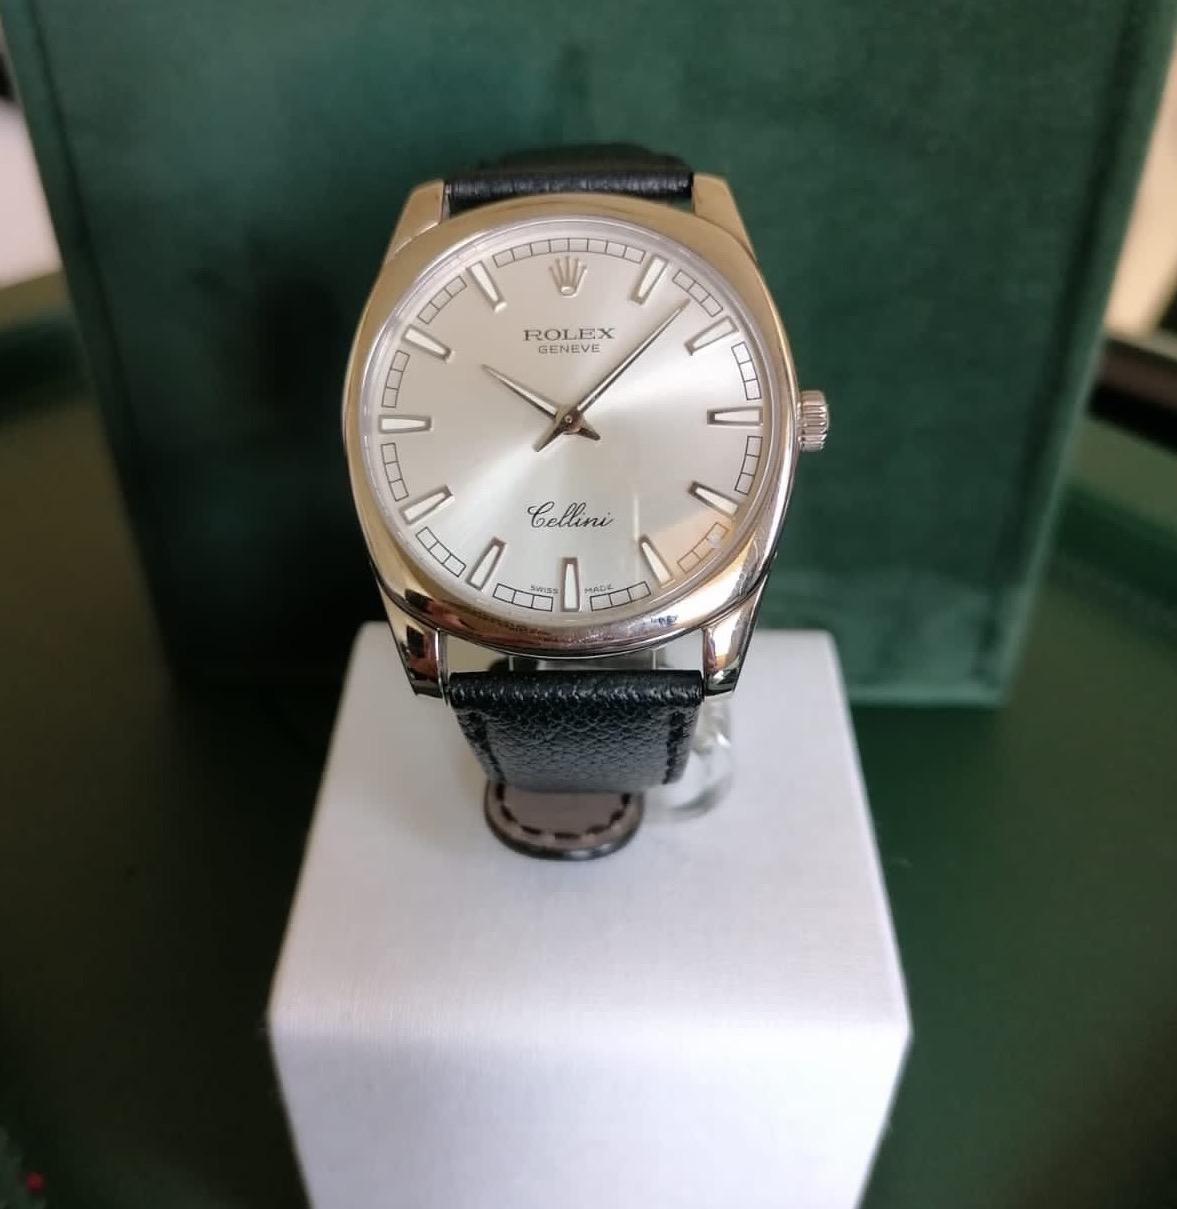 This Rolex Cellini is brand new. 

With a 38mm face made with white Gold and guarded dials in a crystal sapphire glass, it is held on the wrist with a fine black leather strap and white Gold clasp to close it. 

A timelessly classic watch which